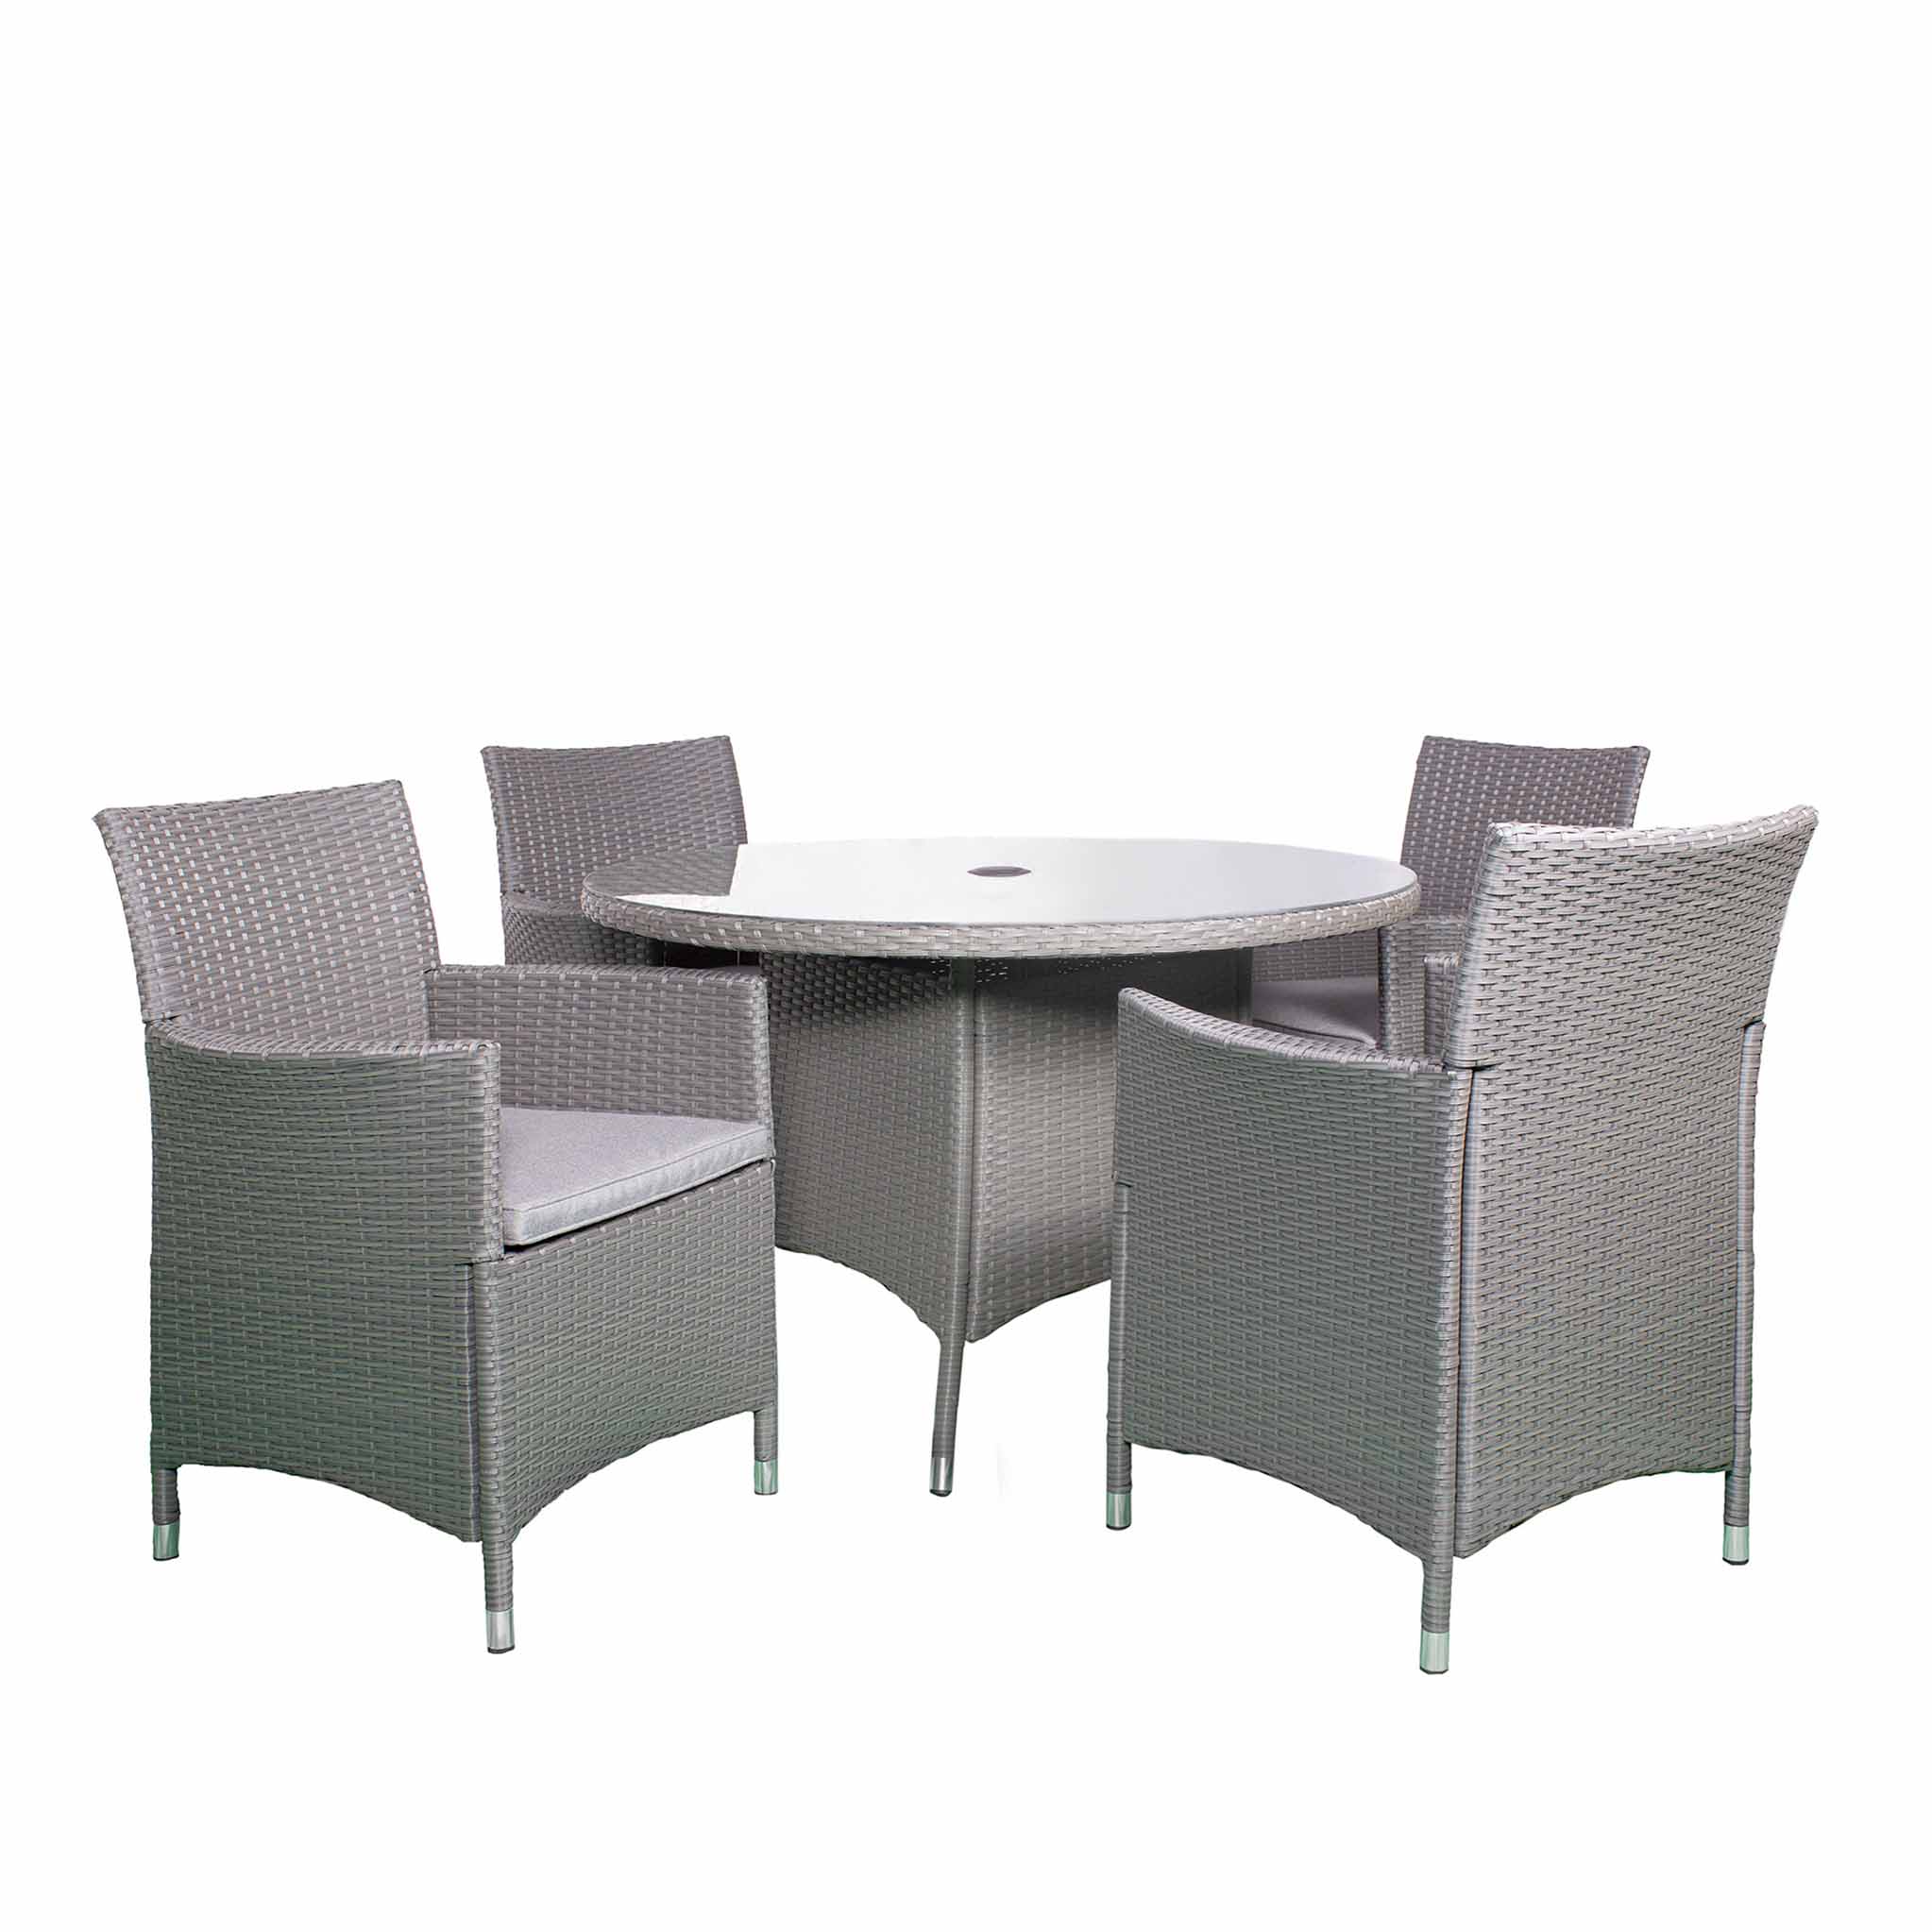 Vada Outdoor Living 110cm 4 Seat Rattan Round Dining Set For Garden